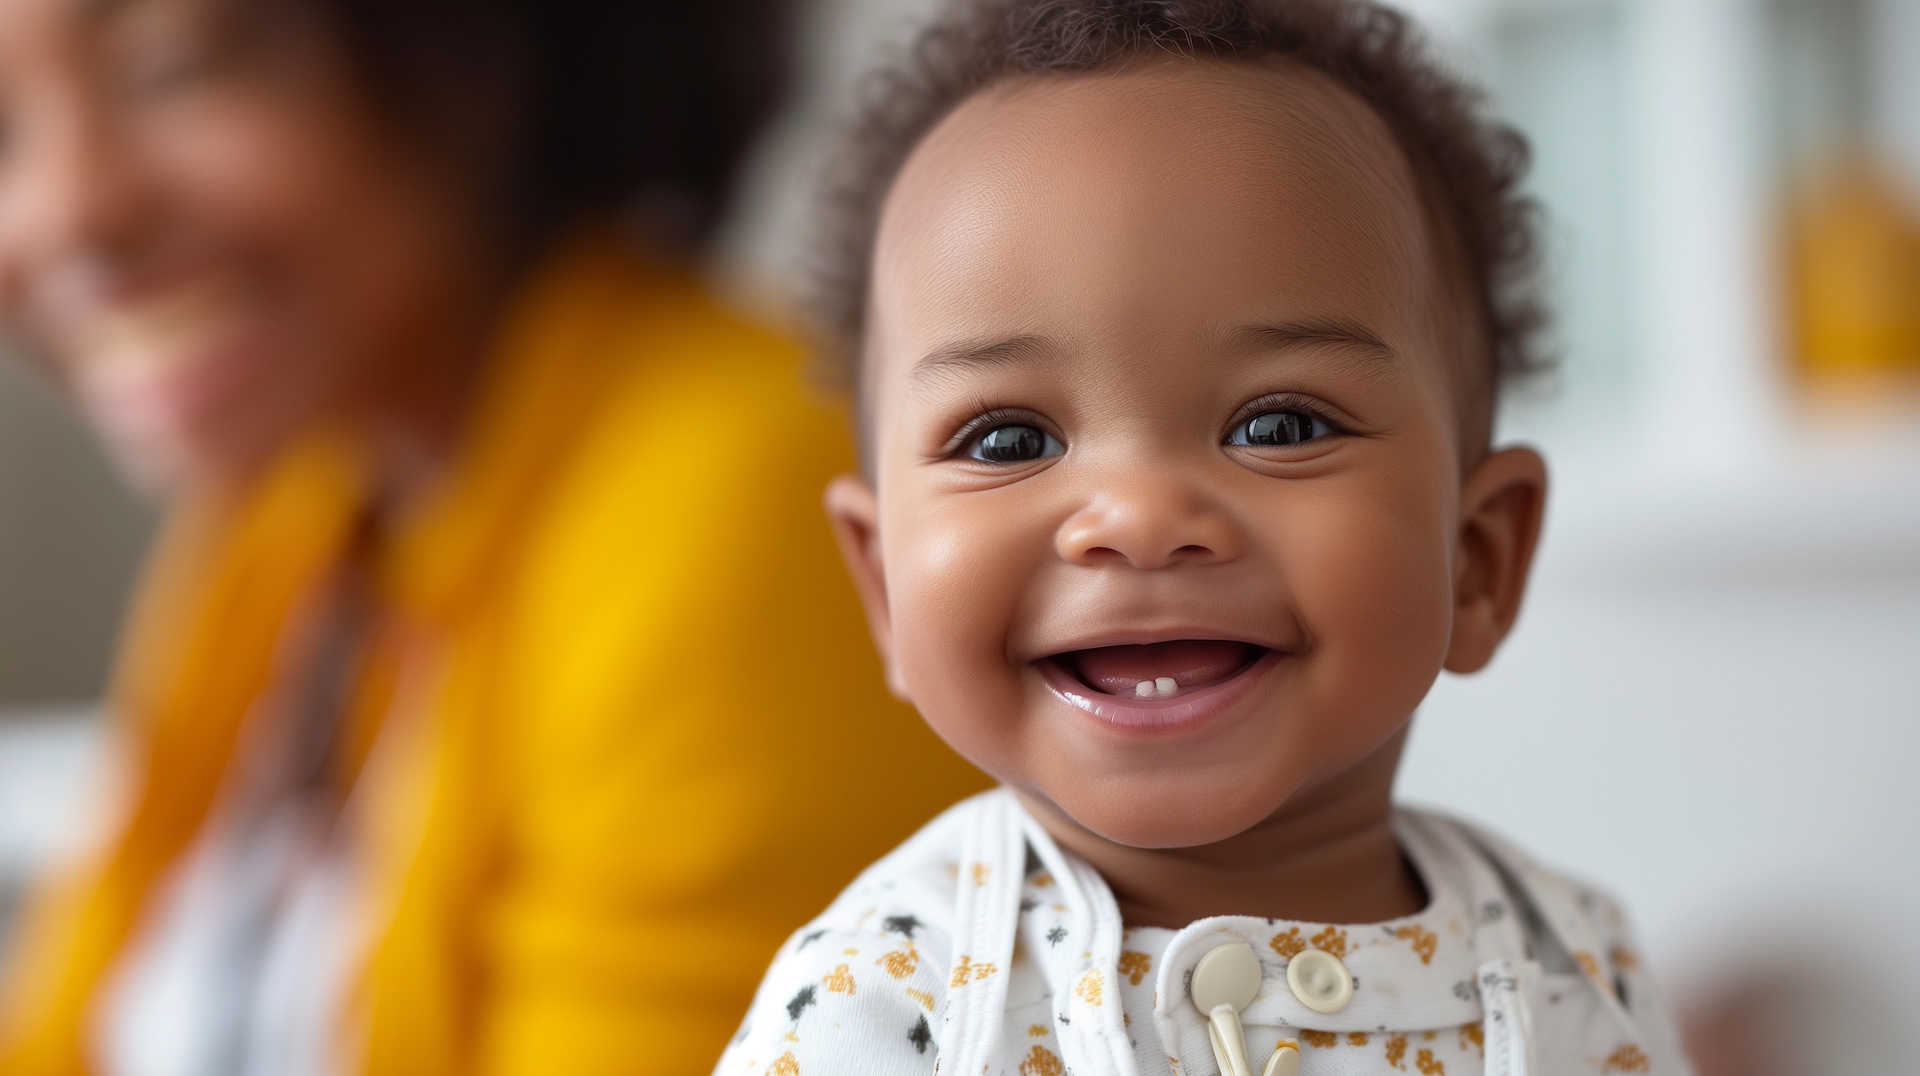 Baby teeth care is essential for preventing future dental issues.